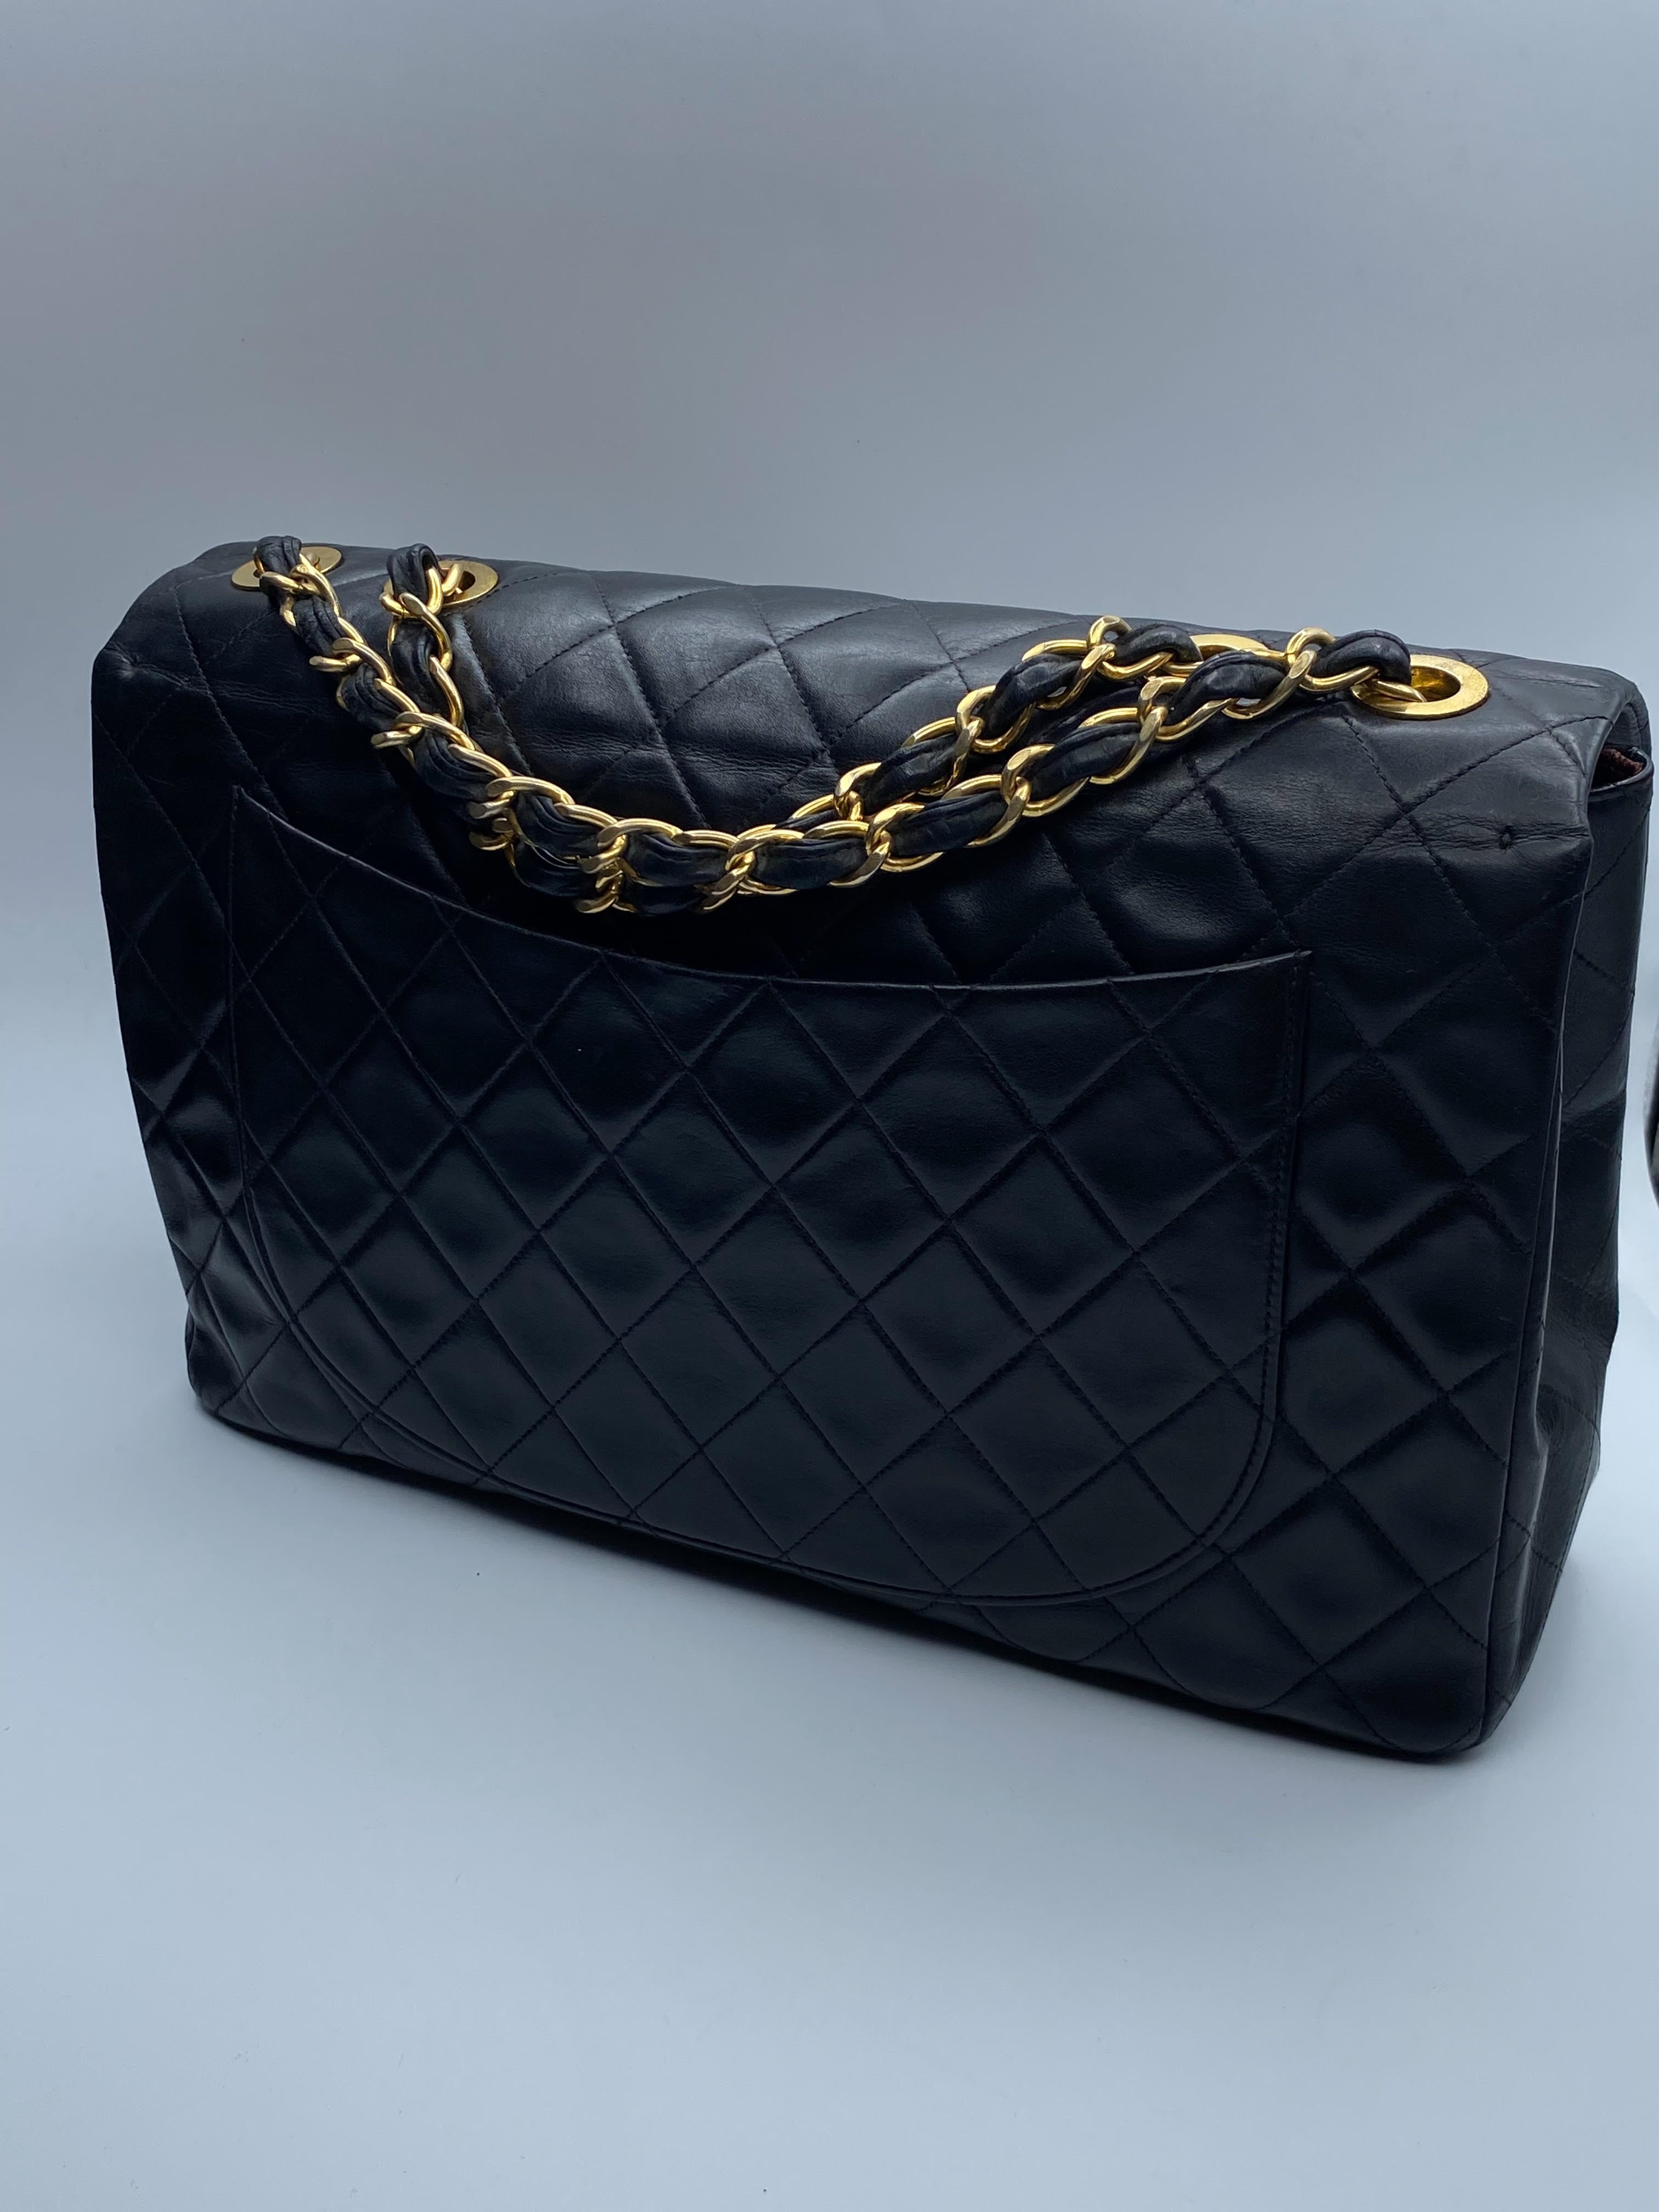 Chanel Large Quilted Caviar Classic Single Flap Shoulder Bag - Beige |  Editorialist